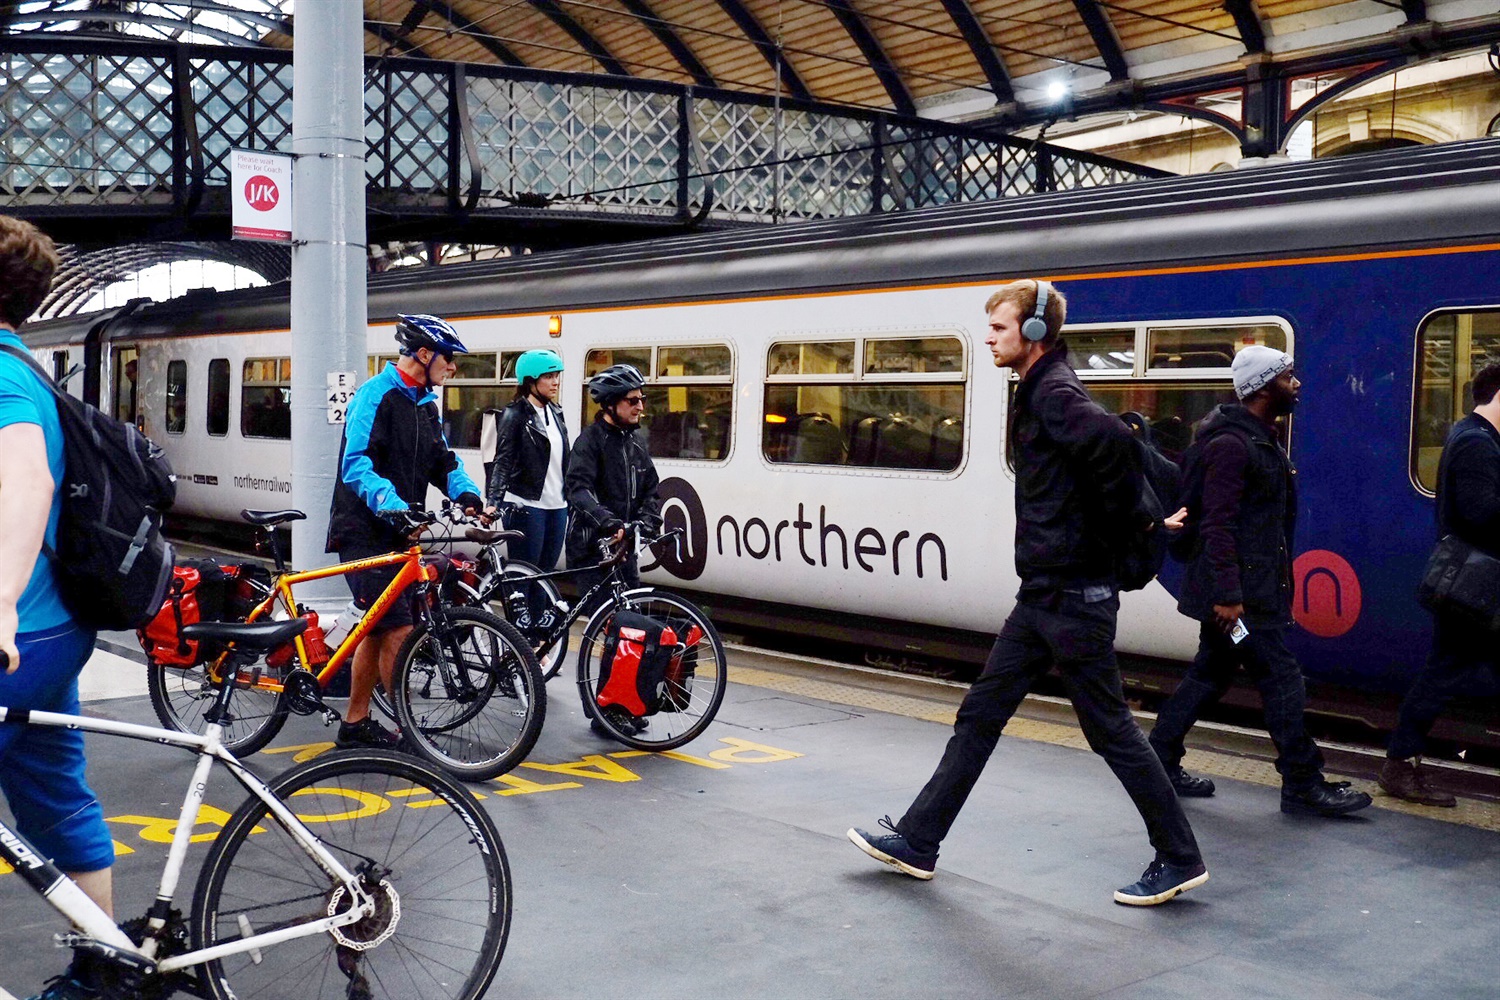 Deliver NPR by 2032 and invest £100bn in northern transport by 2050, MPs demand